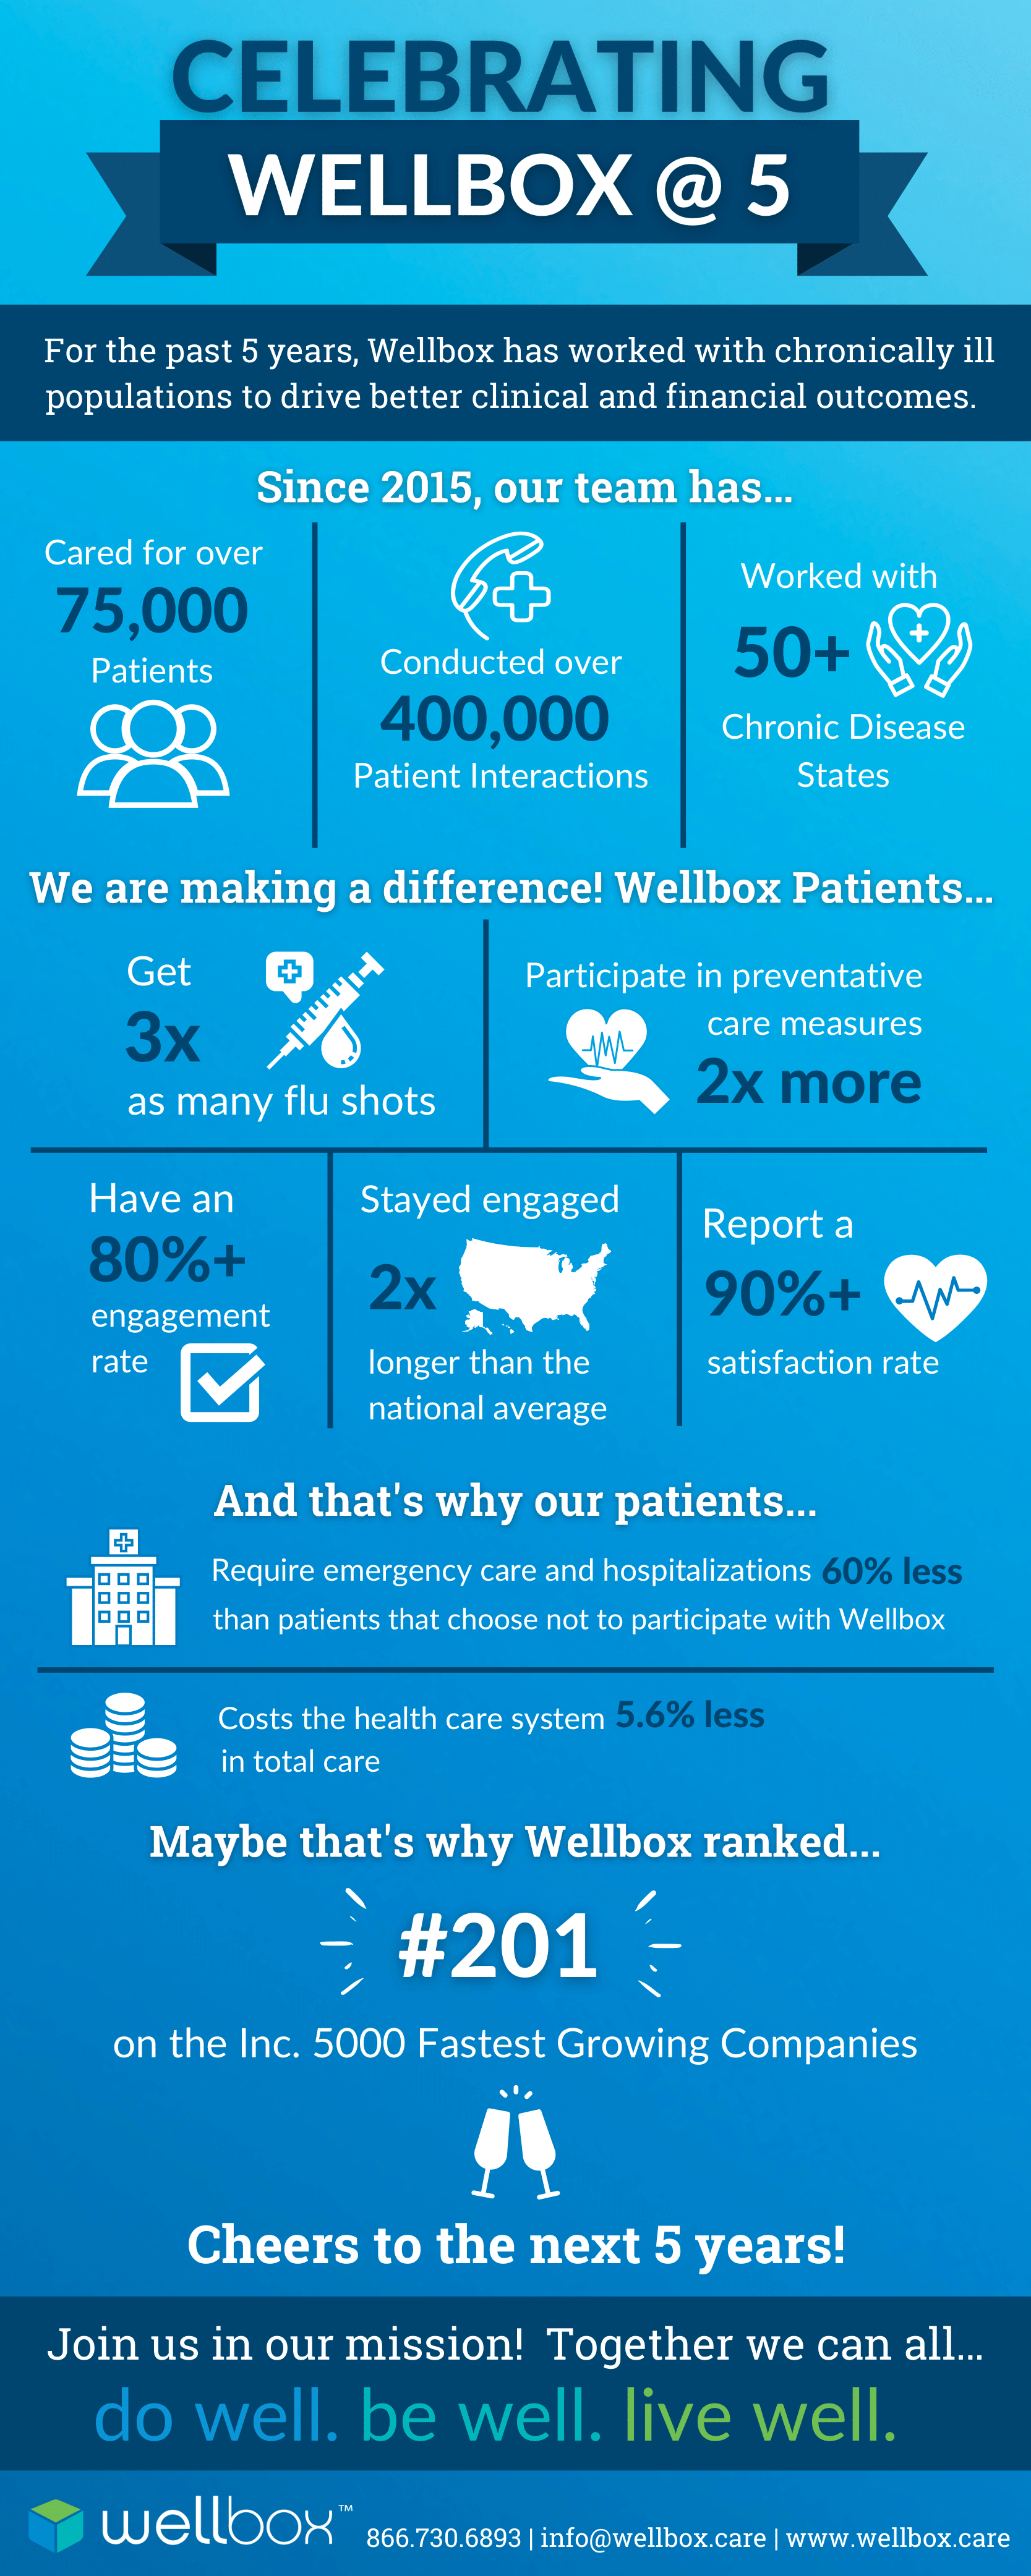 Discover highlights of accomplishments Wellbox achieved over the last 5 years and how we’re making a difference in our patients’ lives. 